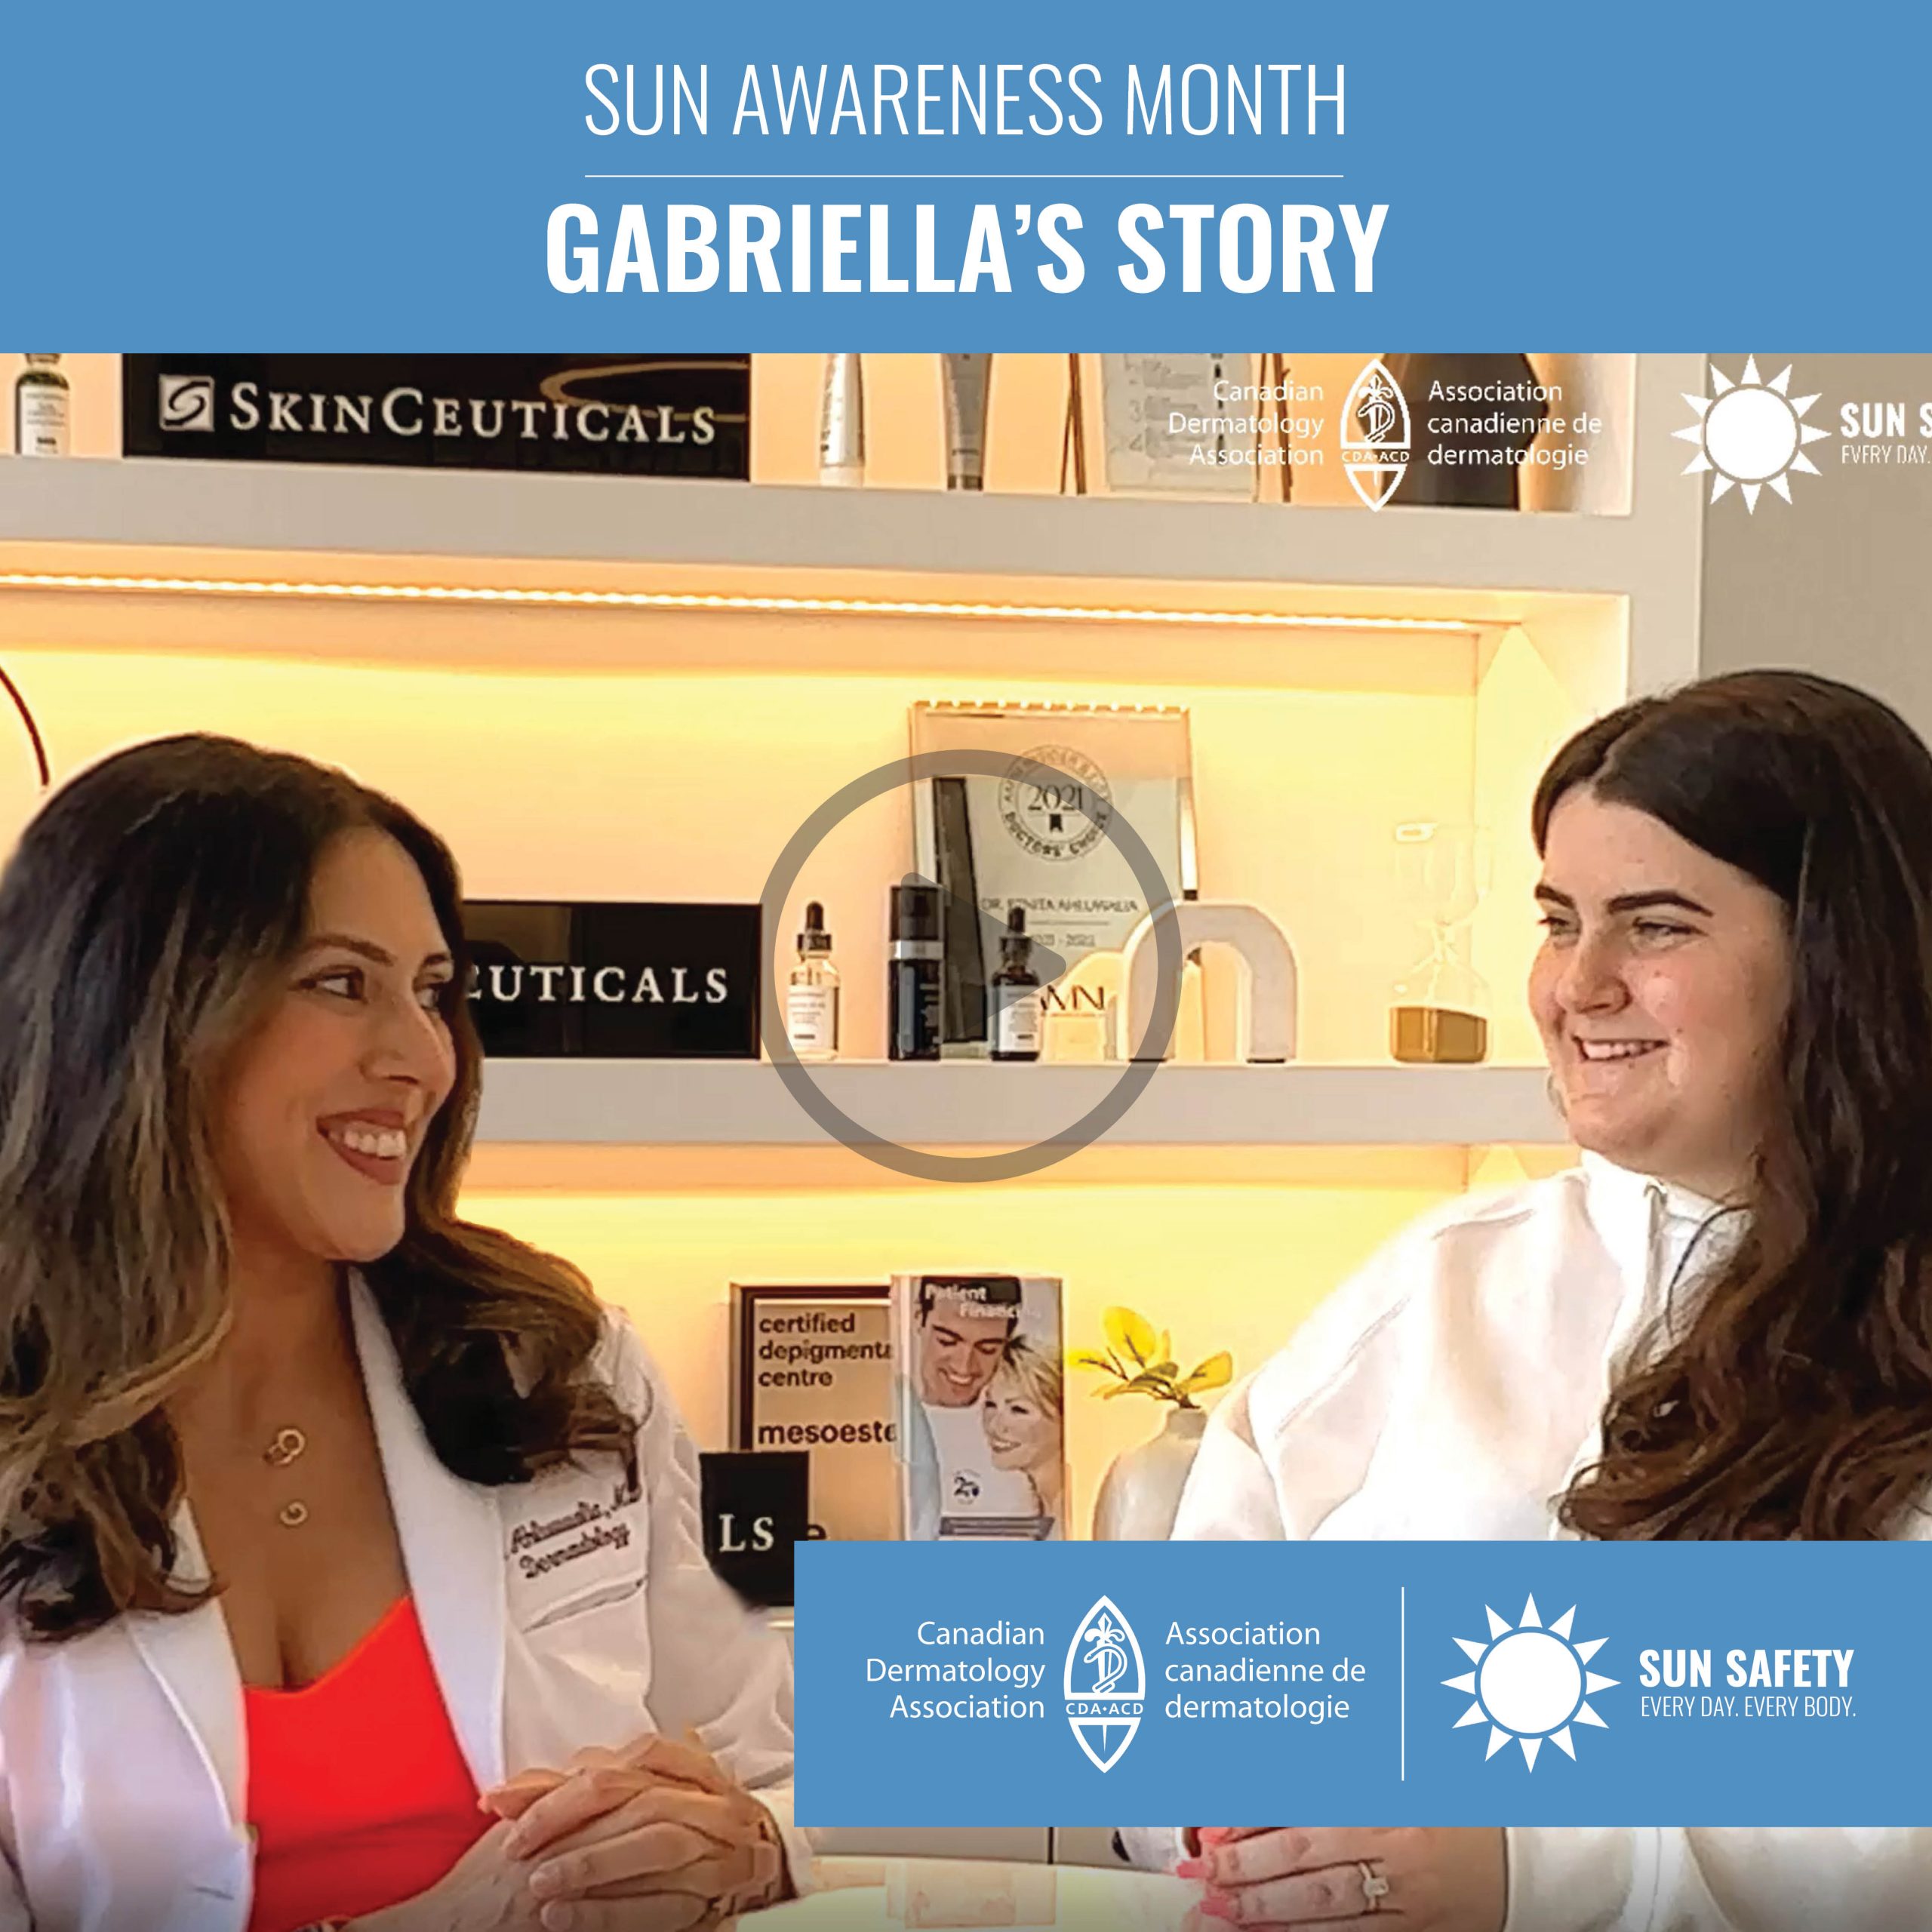 Dr Renita Ahluwalia talks to her patient about her skin cancer journey